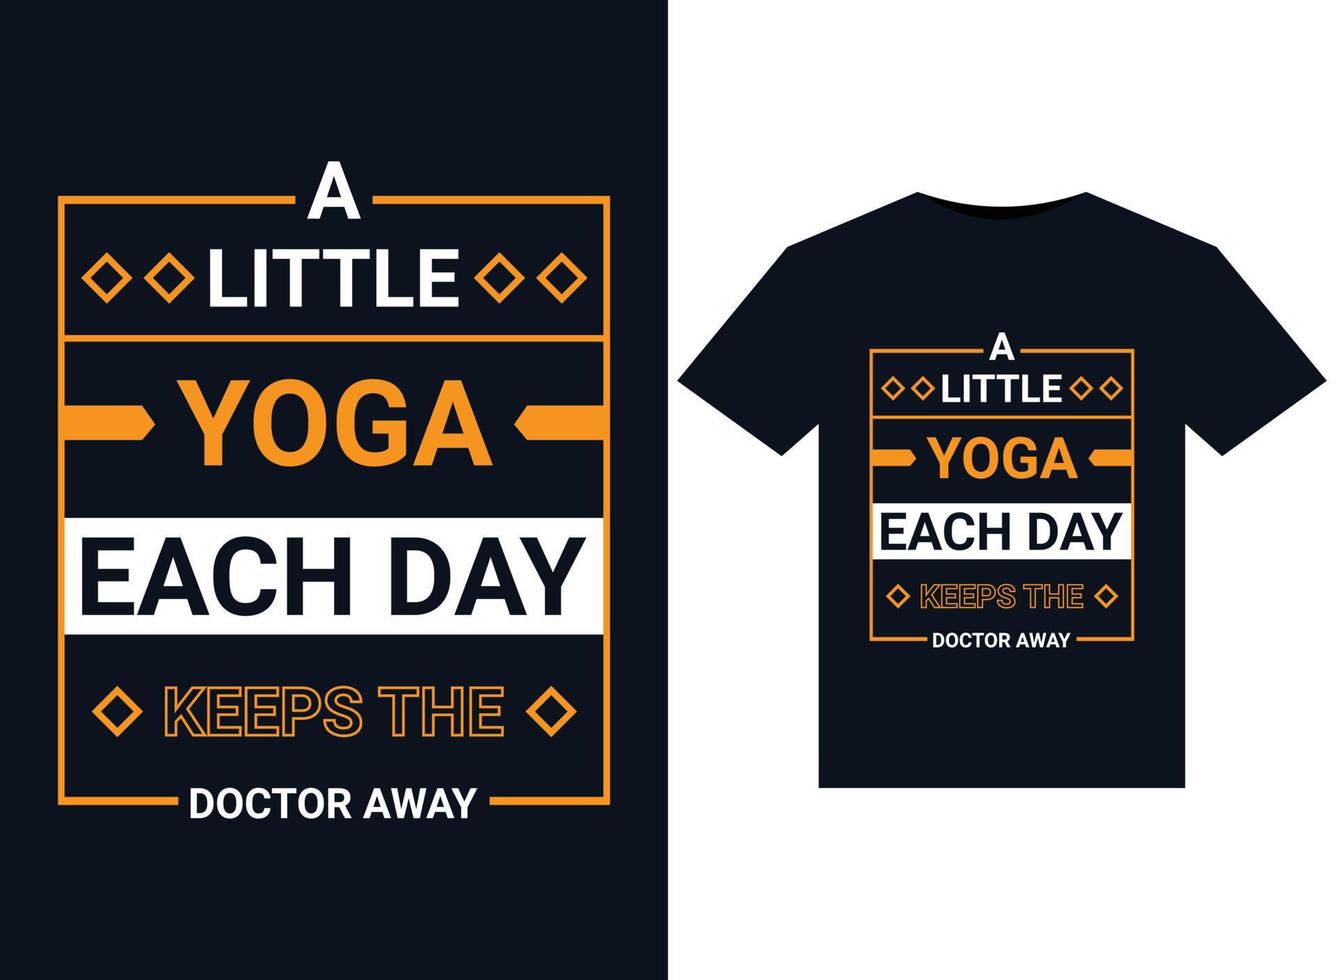 A LITTLE YOGA EACH DAY KEEPS THE DOCTOR AWAY illustrations for print-ready T-Shirts design vector